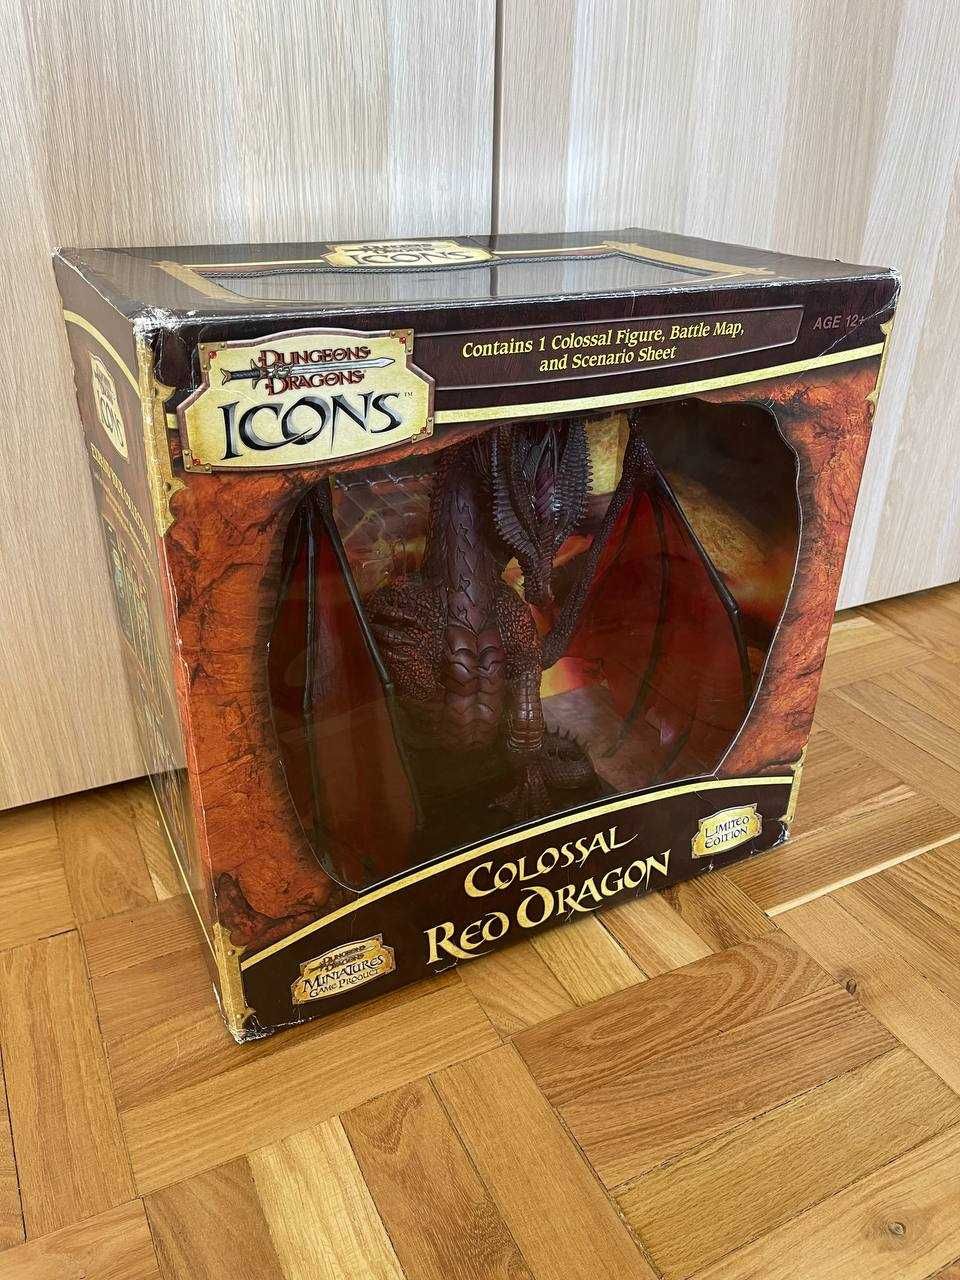 Colossal Red Dragon - Dungeons & Dragons D&D Icons